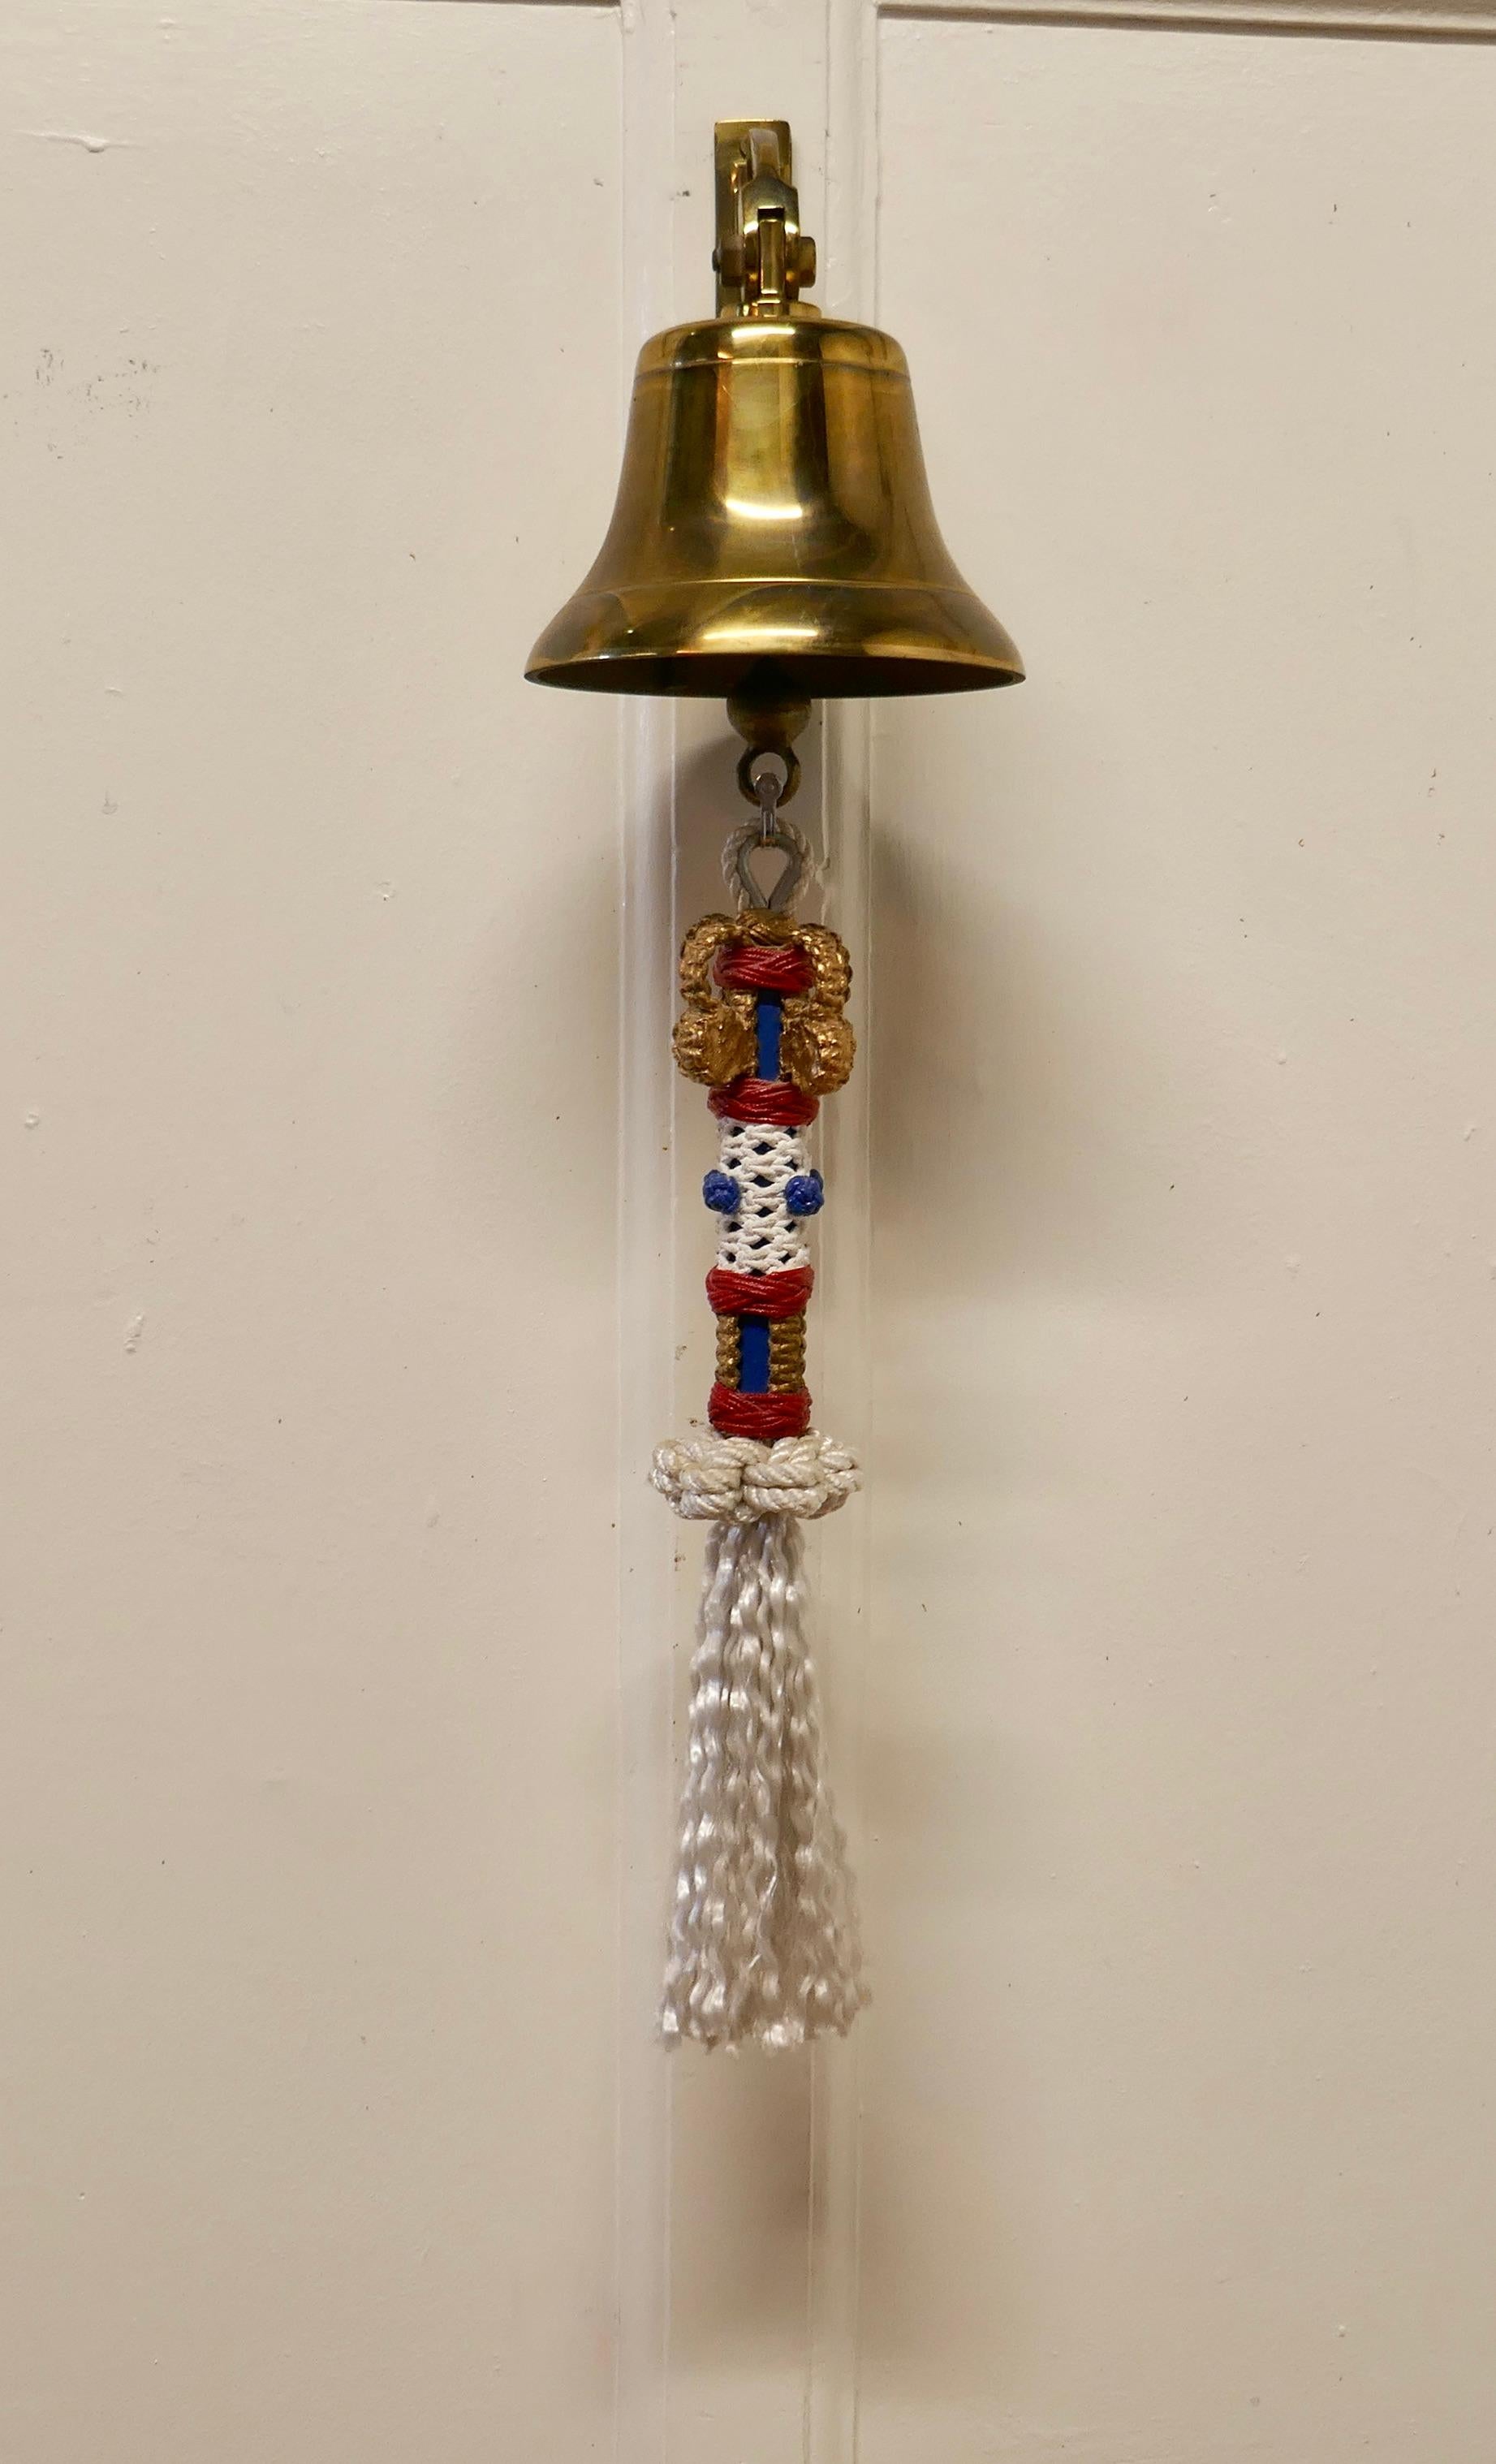 Brass ships bell with royal naval bell rope

Brass Ships Bell on a wall bracket, this good brass bell has a superbly knotted bell rope in Red, White, Blue and Gold for the Crown at the top
The bell is complete with clapper, it is in very good